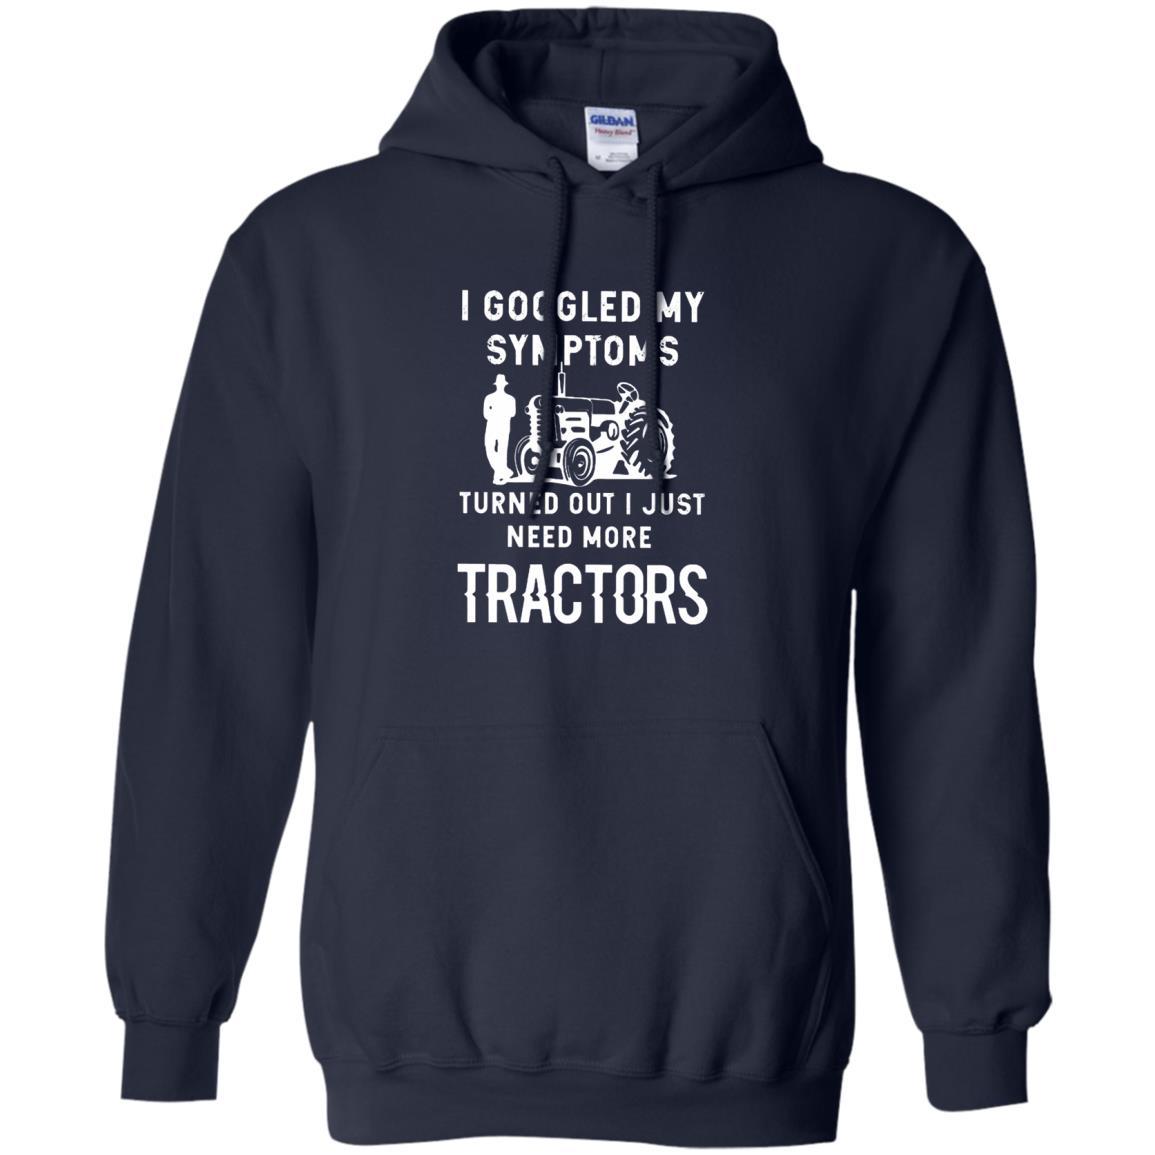 Googled My Symptoms Turned Out Just Need More Tractors T Shirt